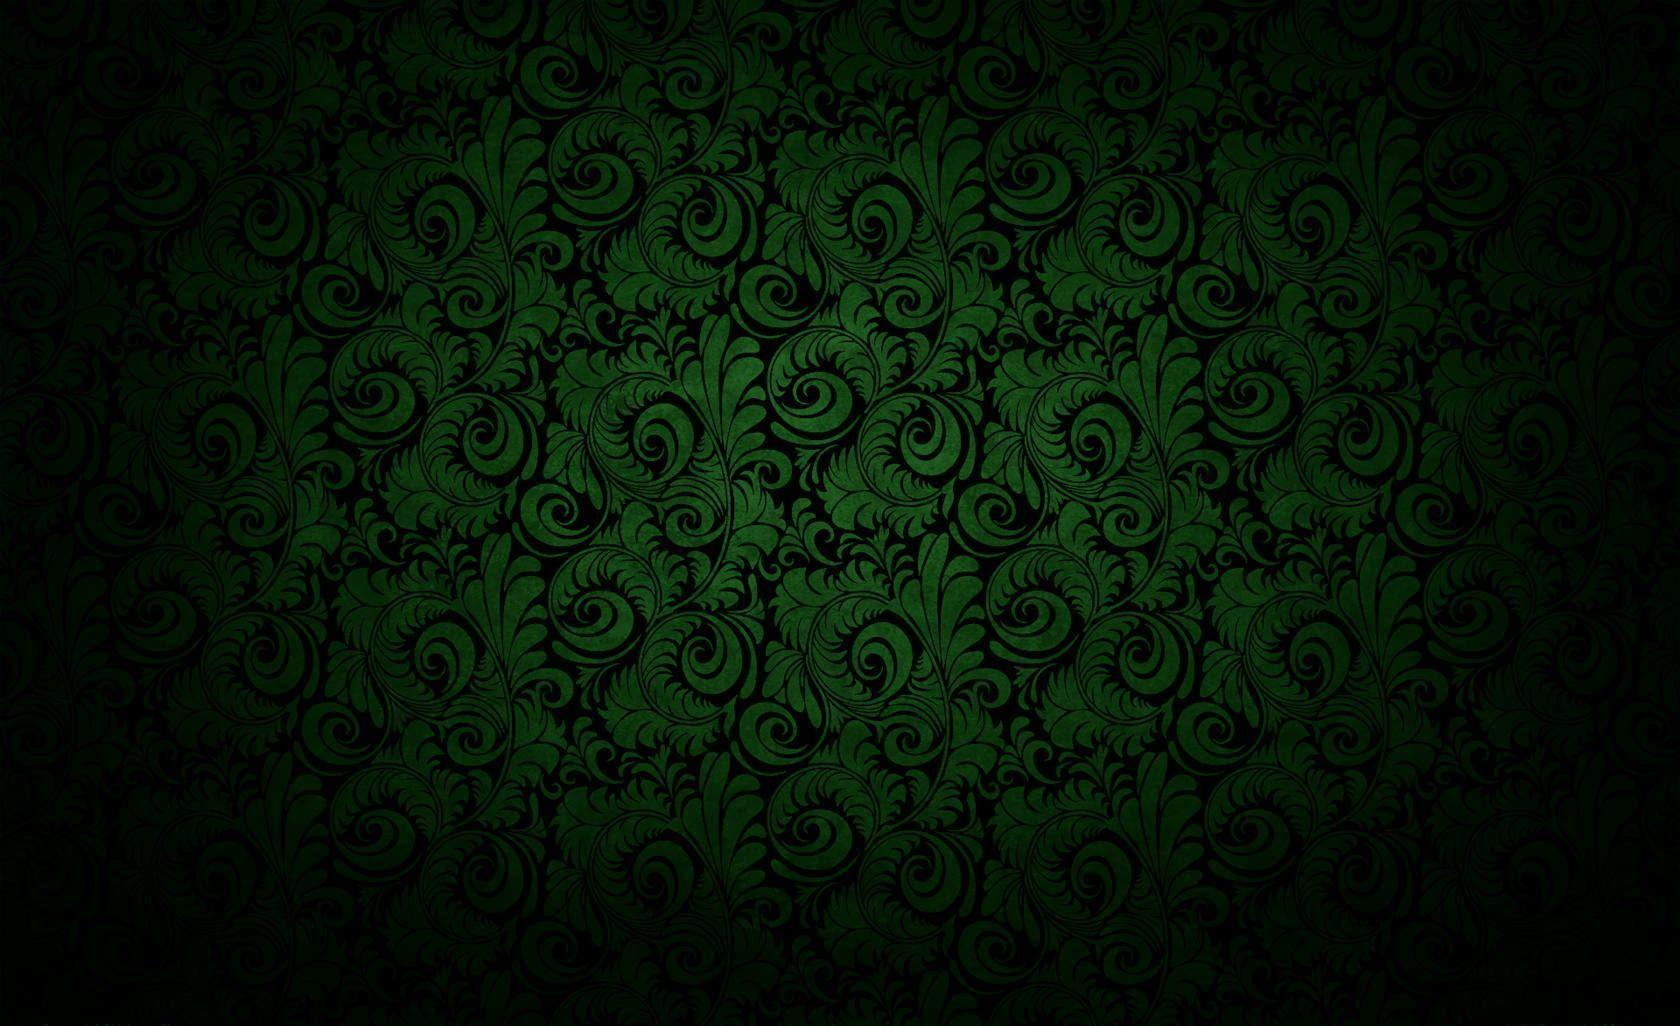 Black And Green Backgrounds - Wallpaper Cave